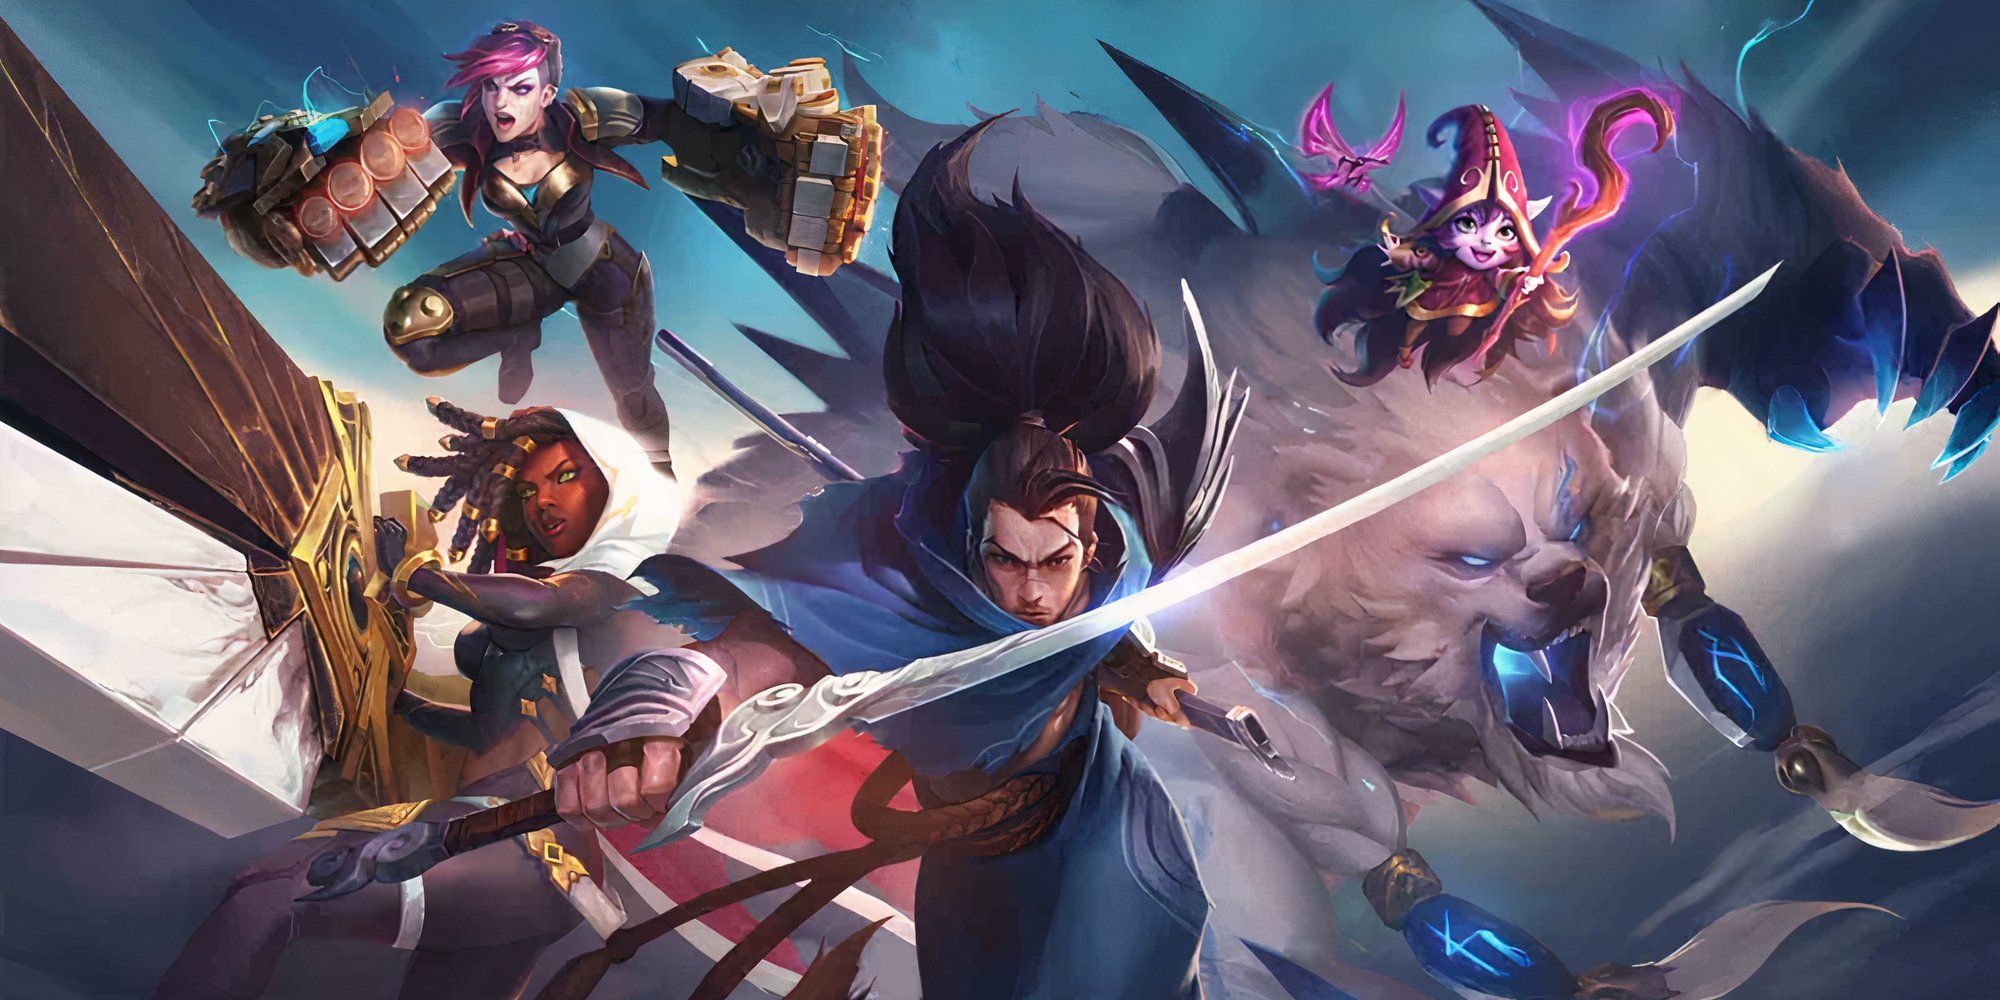 Promotional still from League of Legends' Yasuo entry.